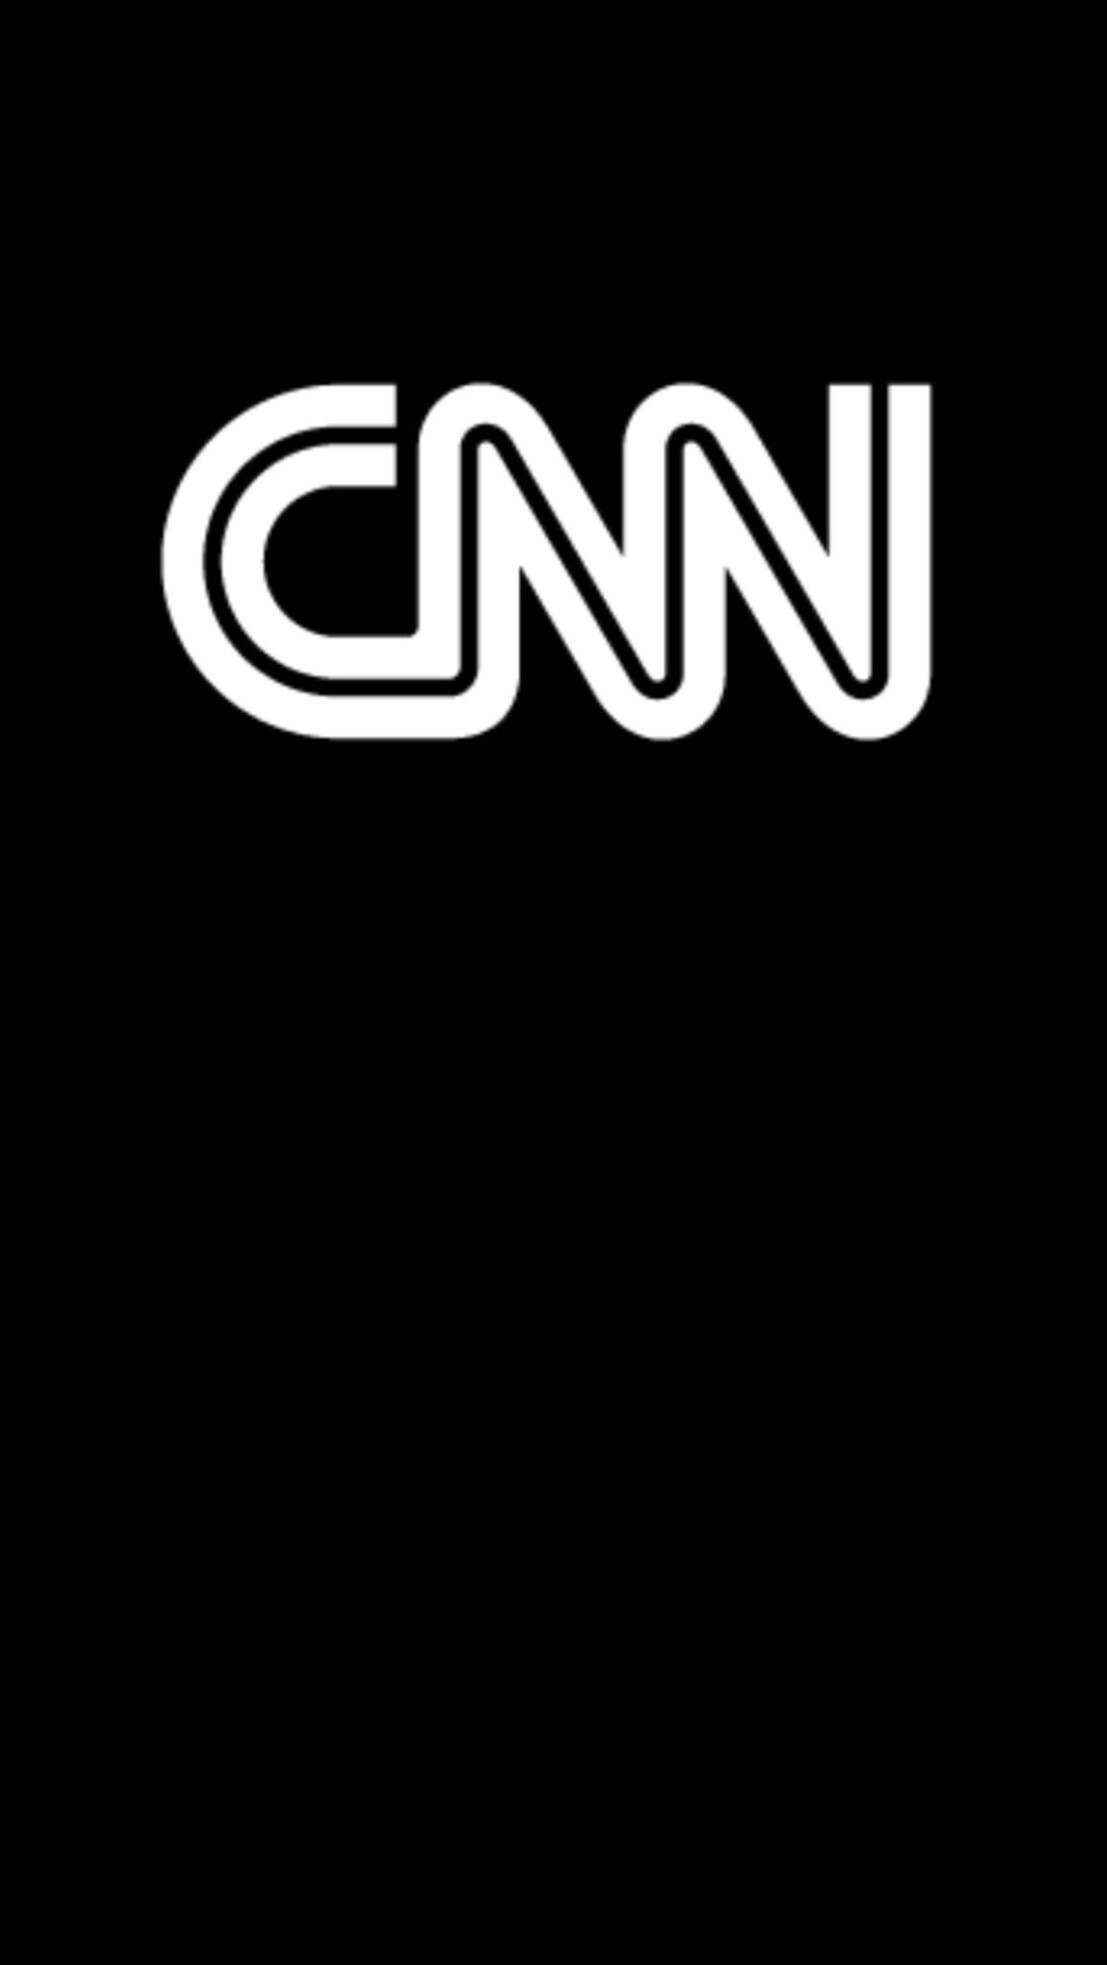 #cnn #black #wallpaper #android #iphone